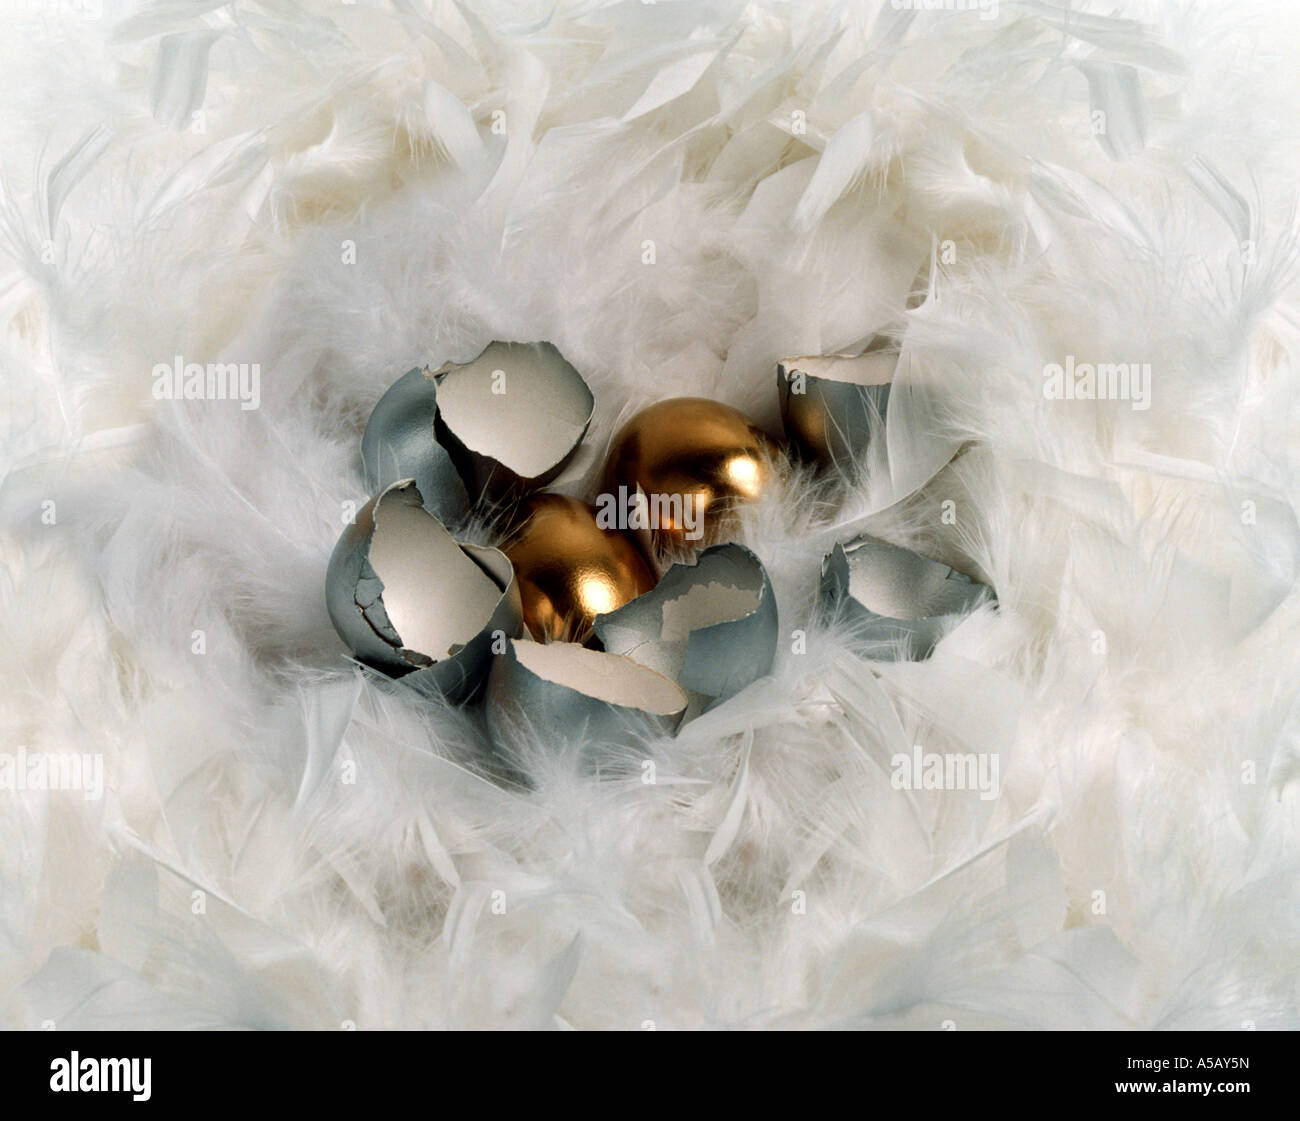 Silver and Gold Egg Shells in a Feather Nest Stock Photo